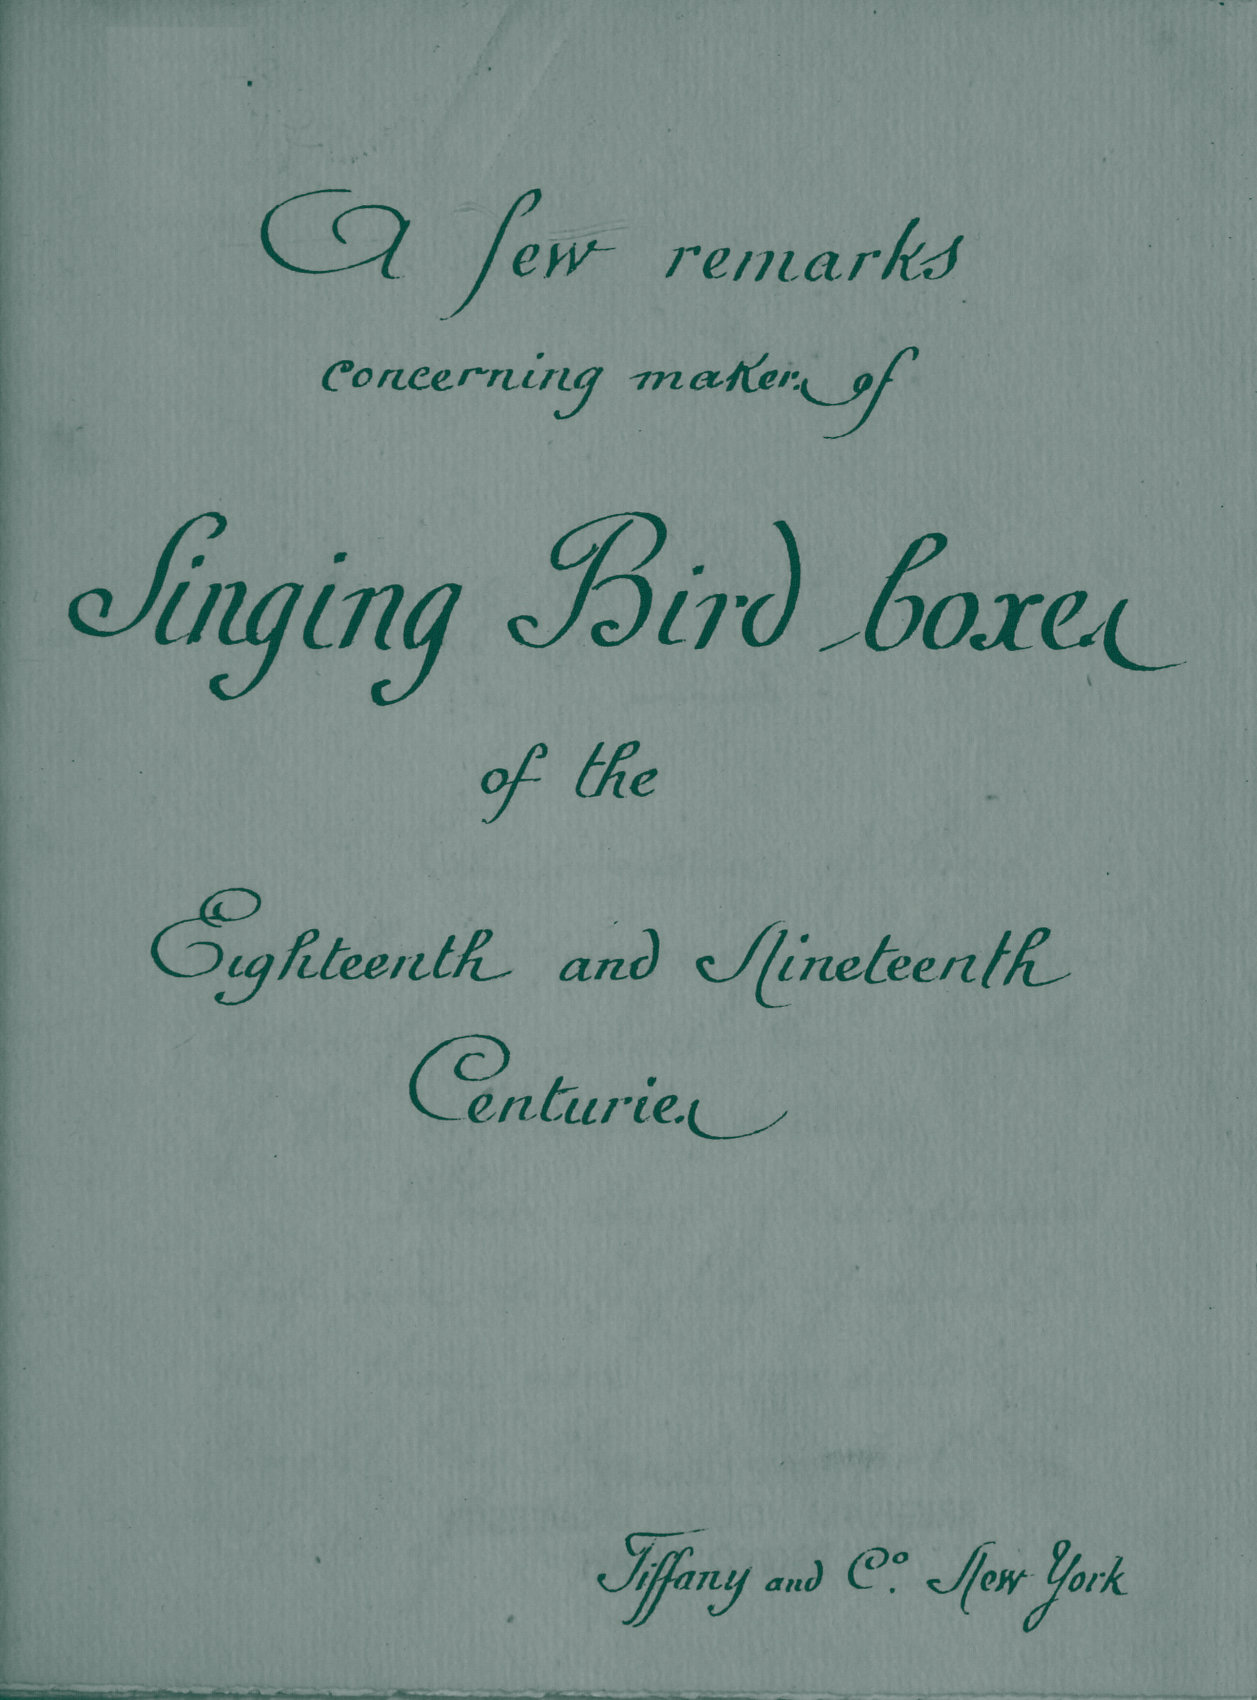 A Few Remarks Concerning Makers of Singing Bird Boxes of the Eighteenth and Nineteenth Centuries